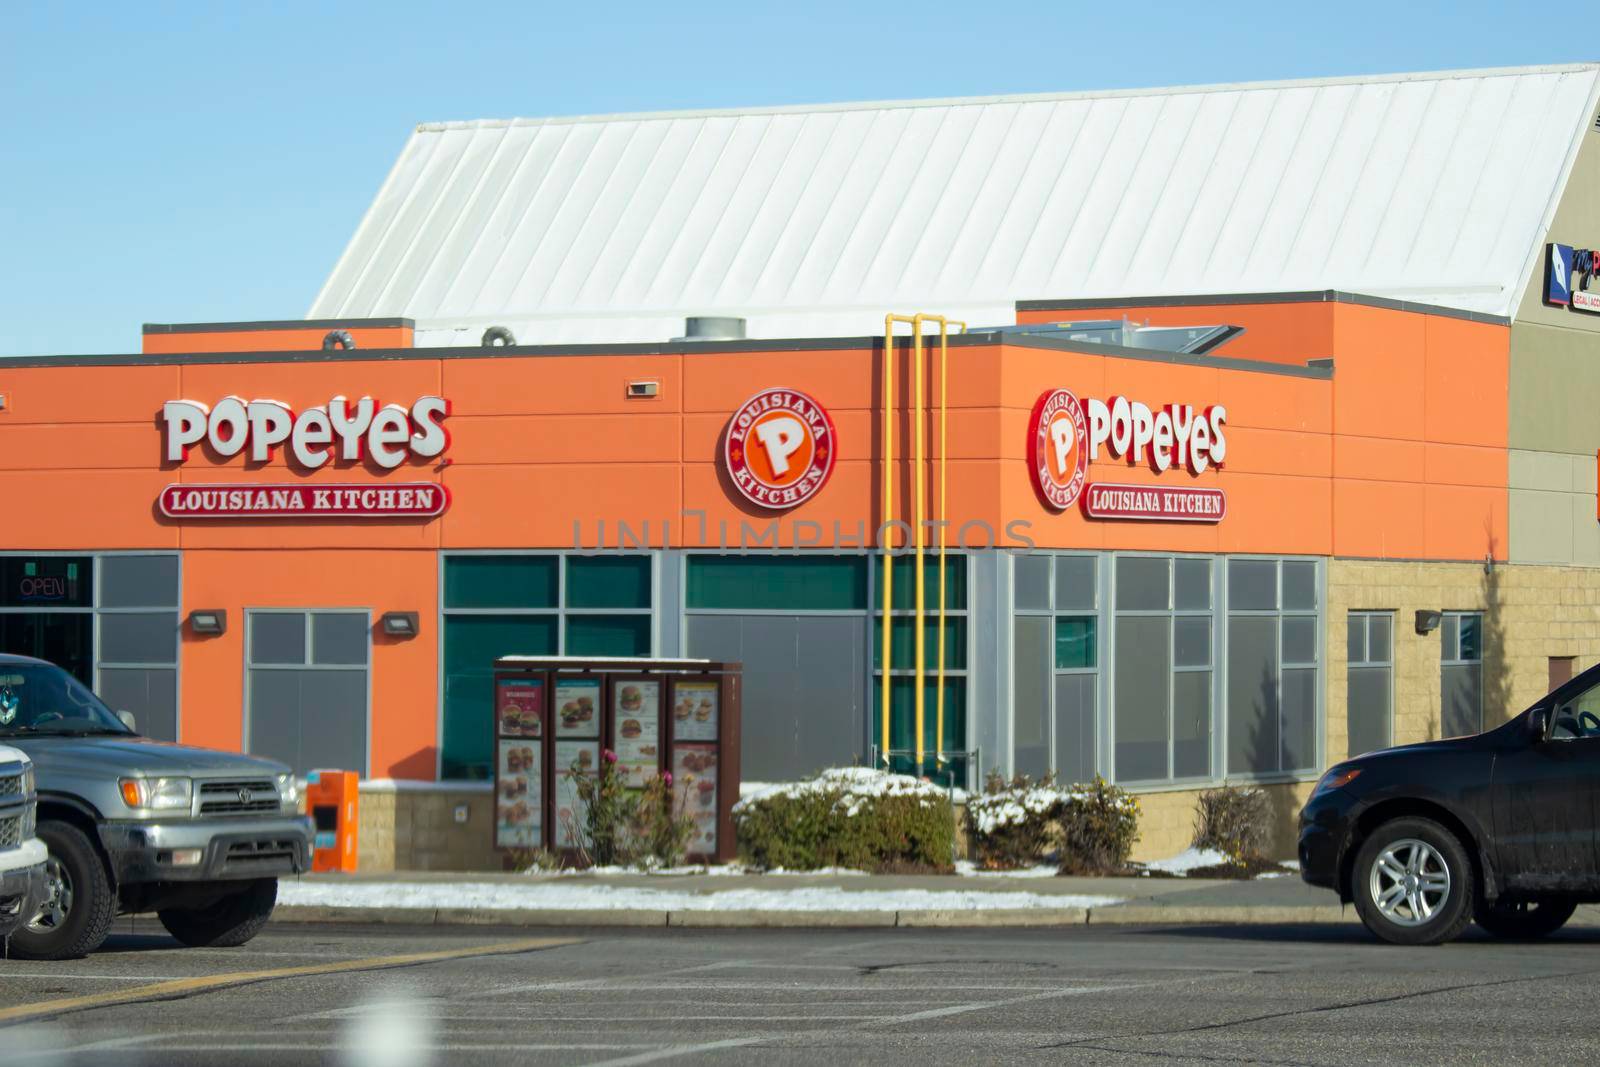 Calgary Alberta, Canada. Oct 17, 2020. Popeyes is an American multinational chain of fried chicken fast food restaurants from New Orleans, Louisiana and headquartered in Miami, Florida. by oasisamuel